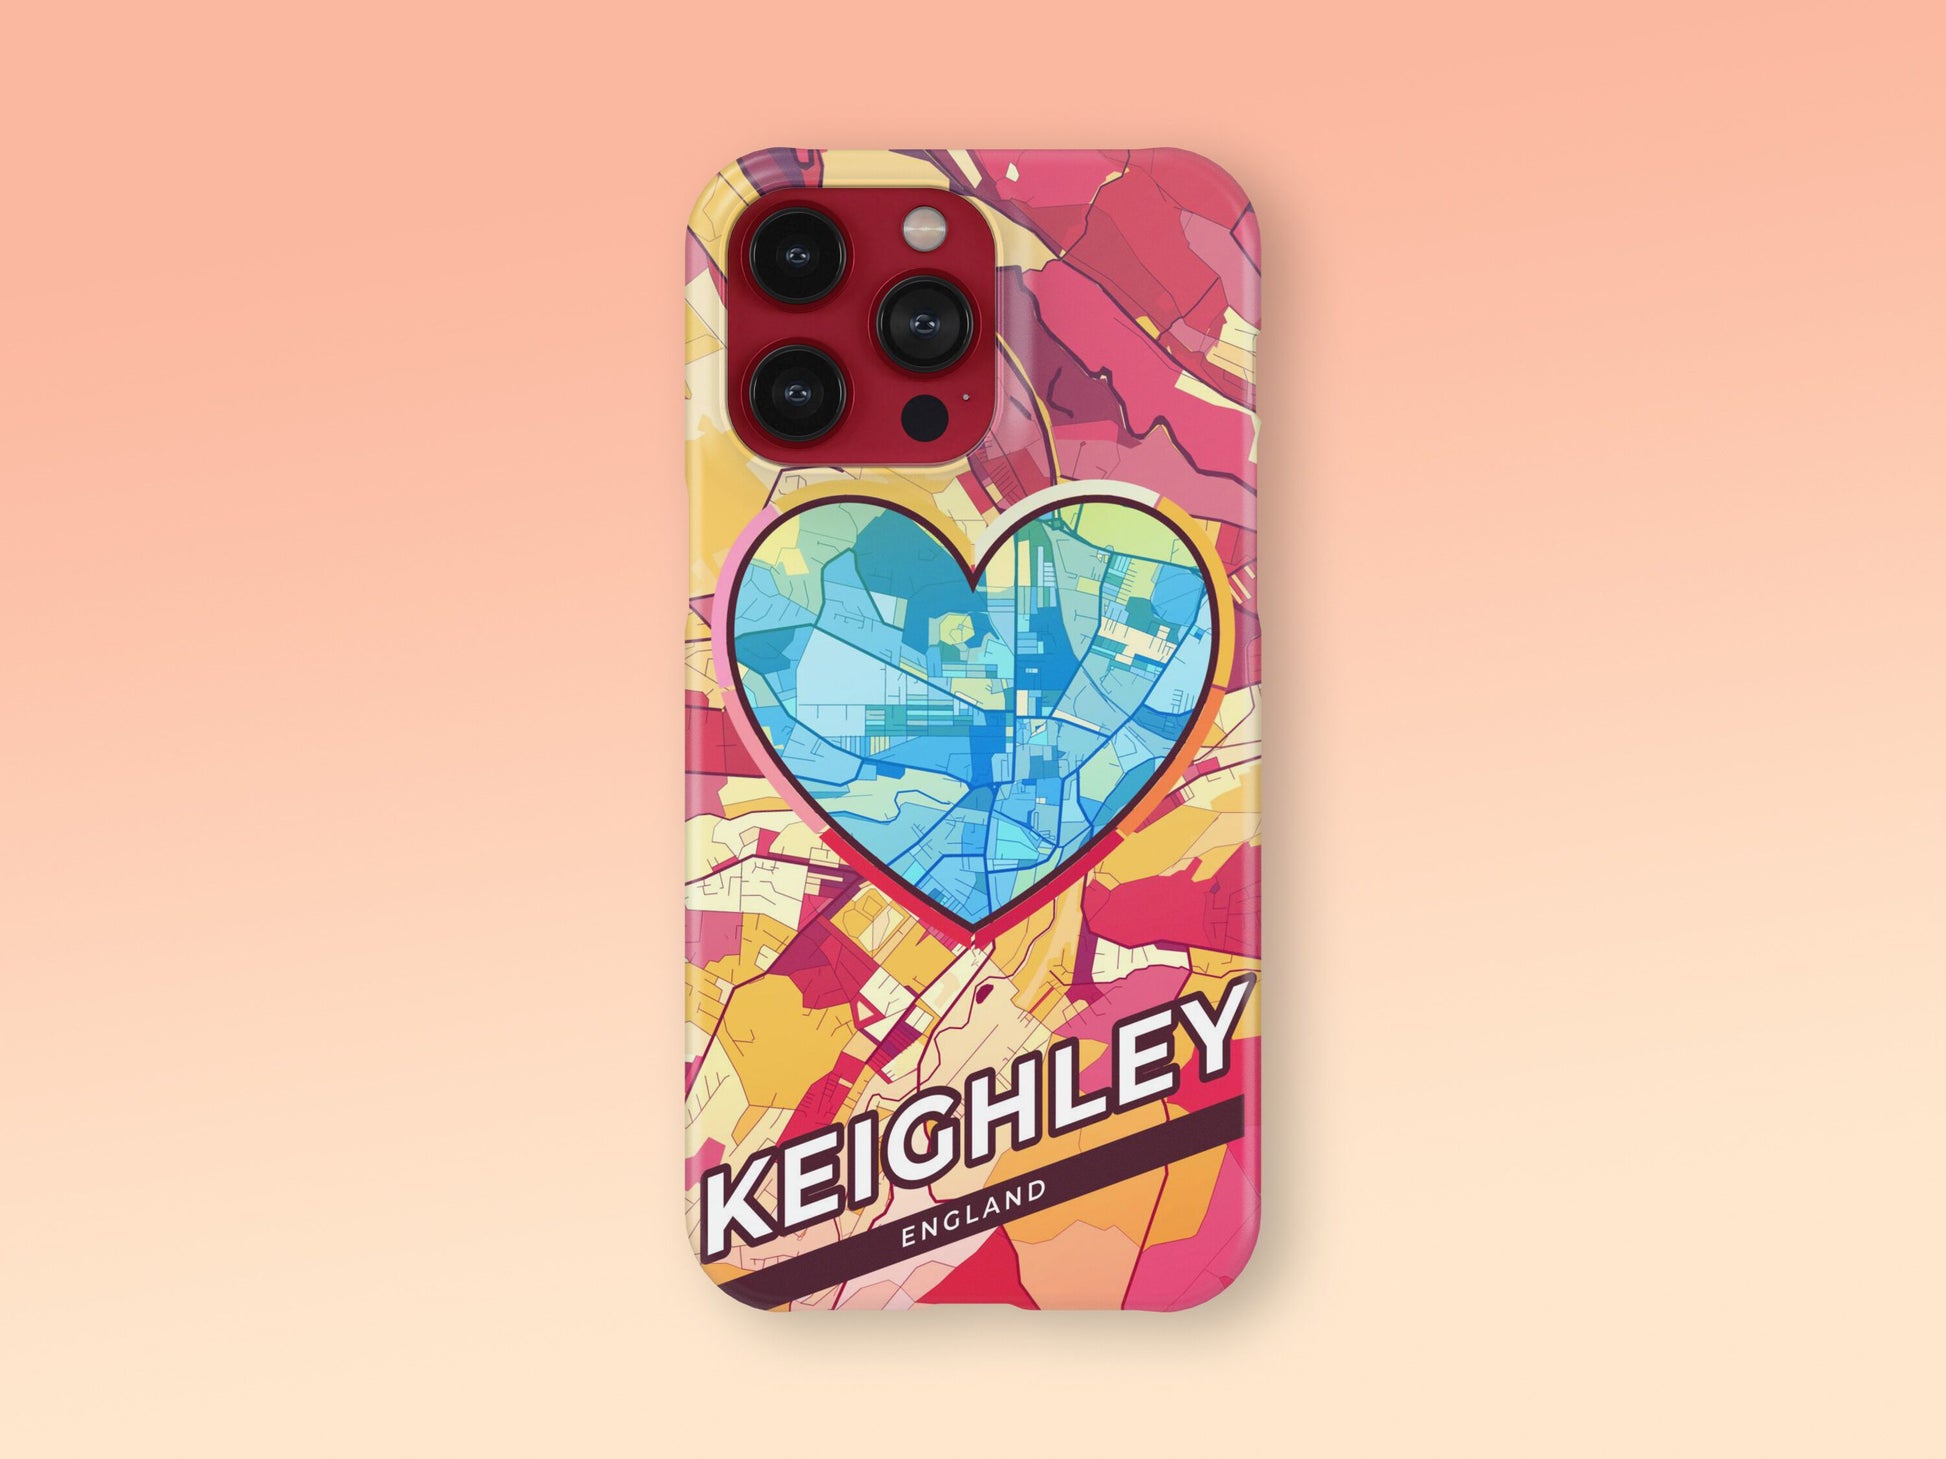 Keighley England slim phone case with colorful icon. Birthday, wedding or housewarming gift. Couple match cases. 2